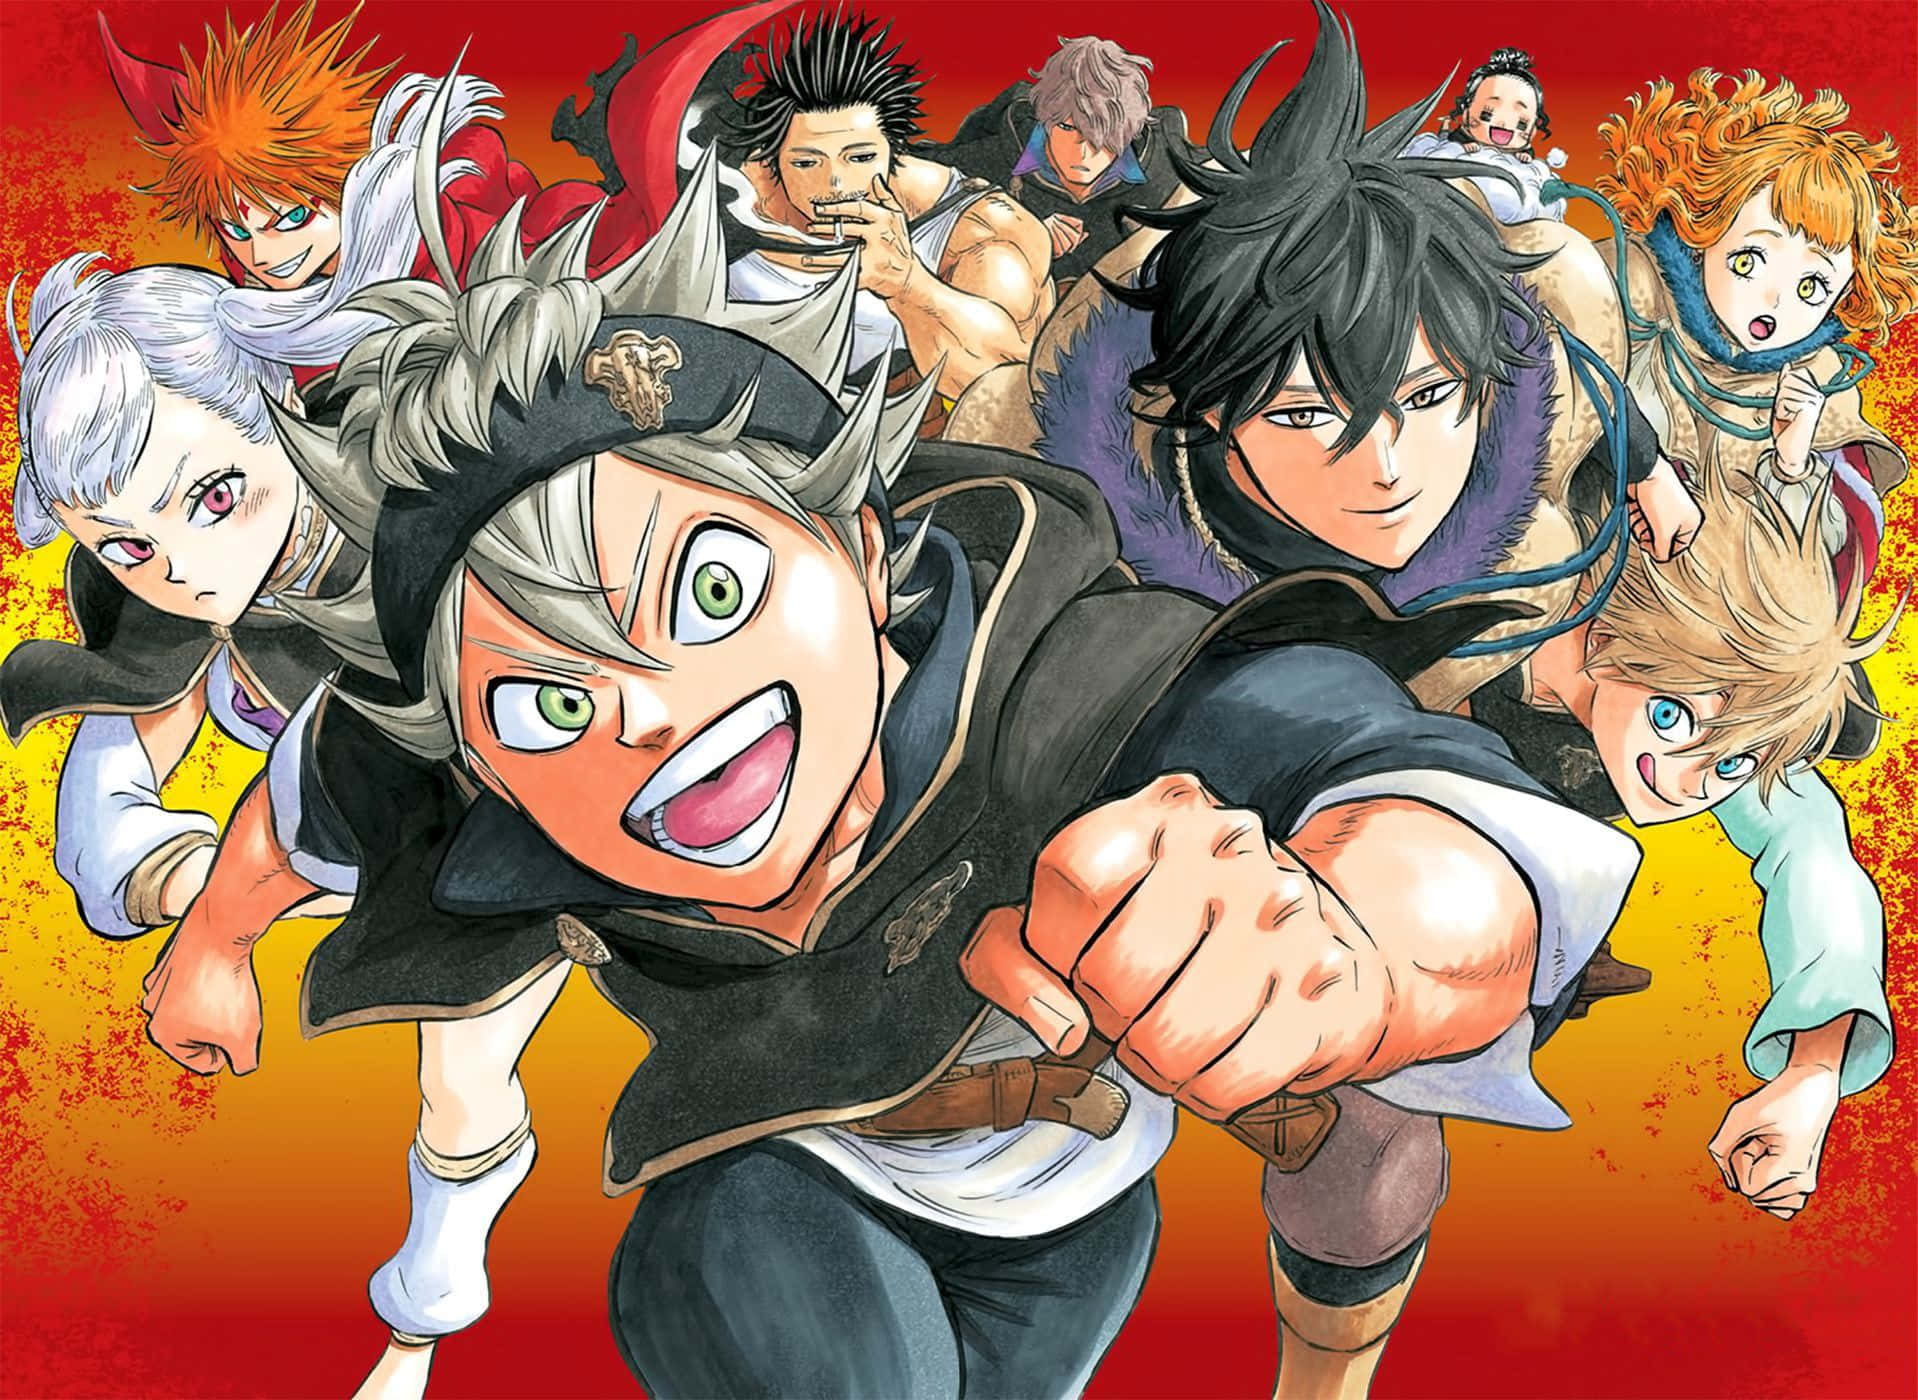 Download  Play Black Clover M  Rise of the Wizard King on PC  Mac  Emulator